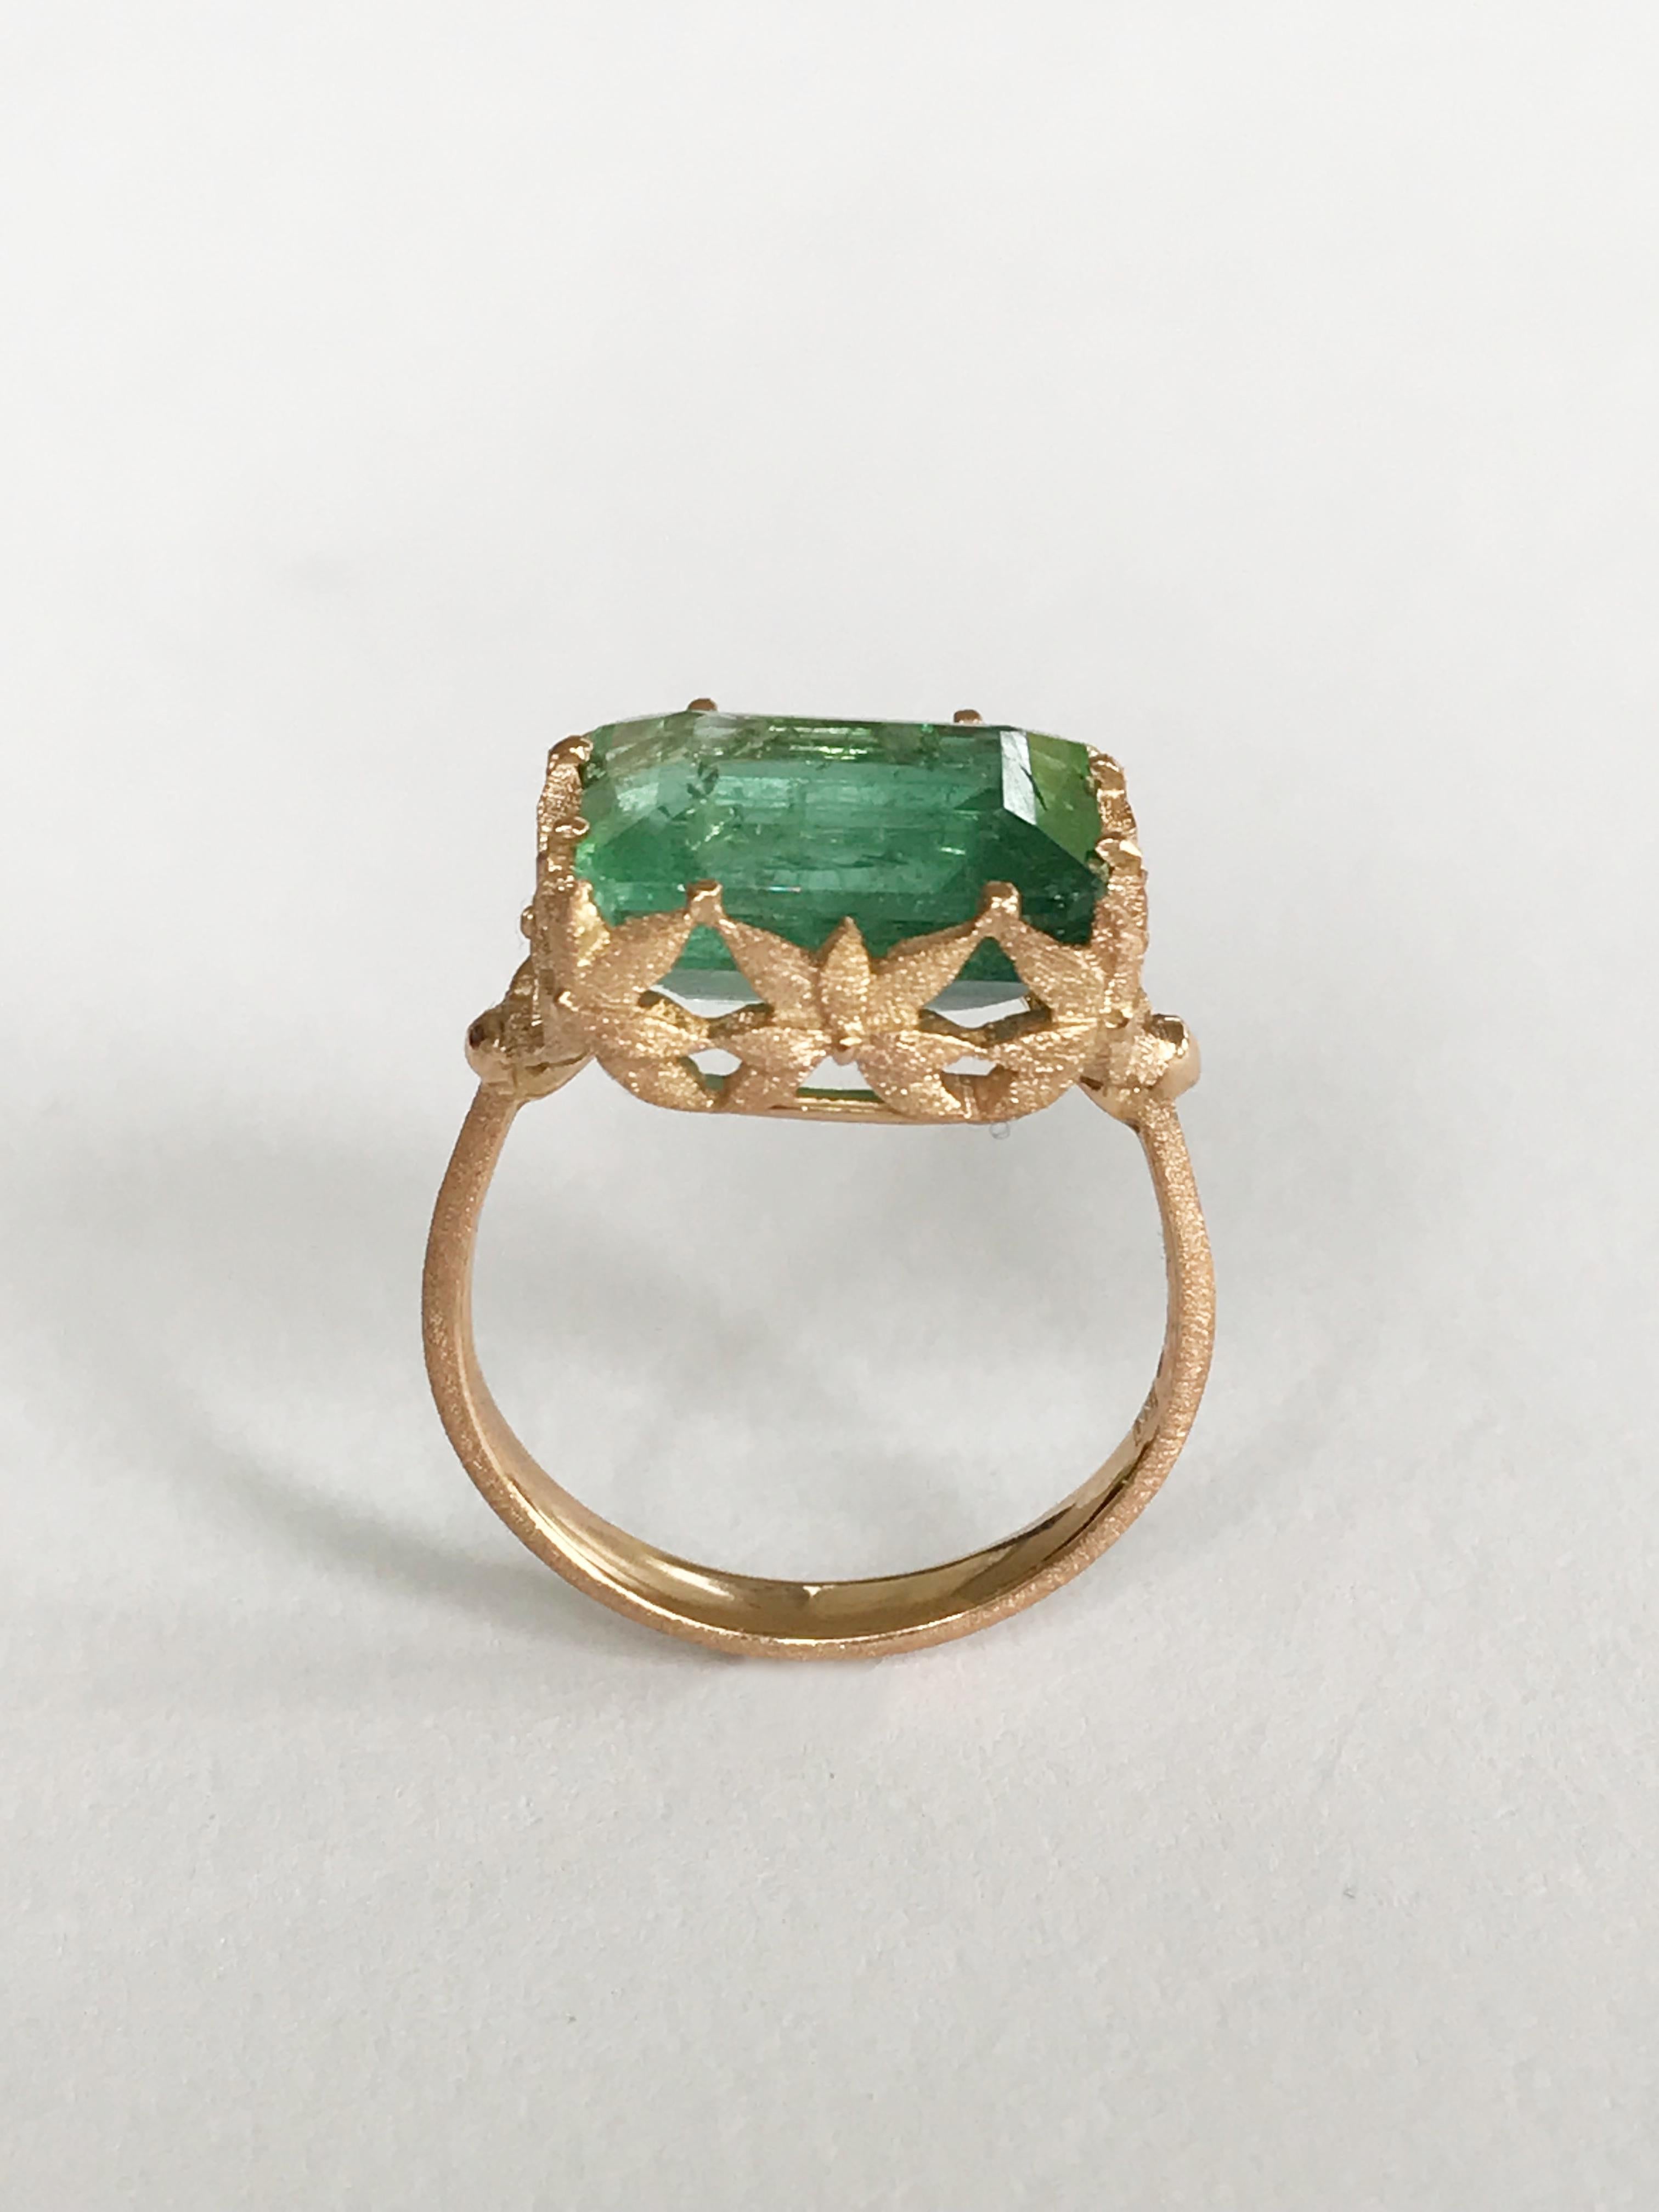 Dalben design 18 kt hand engraved rose gold leaf motif Cocktail Ring with an emerald cut  Green Tourmaline weighting 6,75 carat,
Bezel setting dimension:
width 13,9 mm,
height 12,2 mm. 13,40 carat .  
Ring size 6 3/4 USA - 54 EU resizable to most